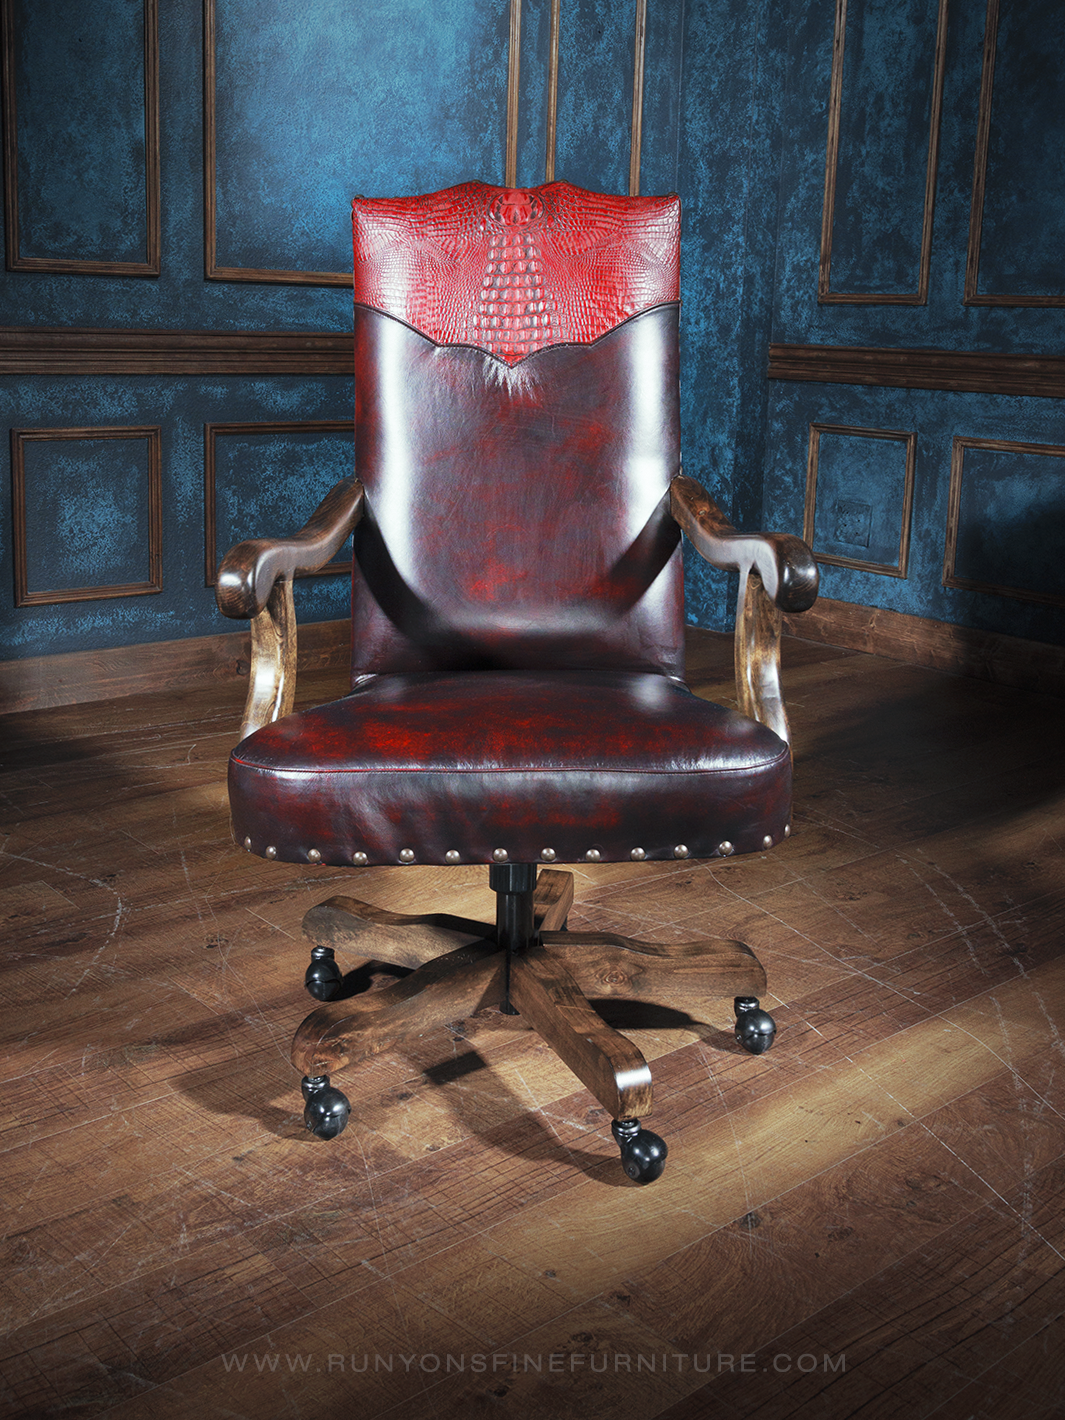 Embossed Leather Western Office Chair